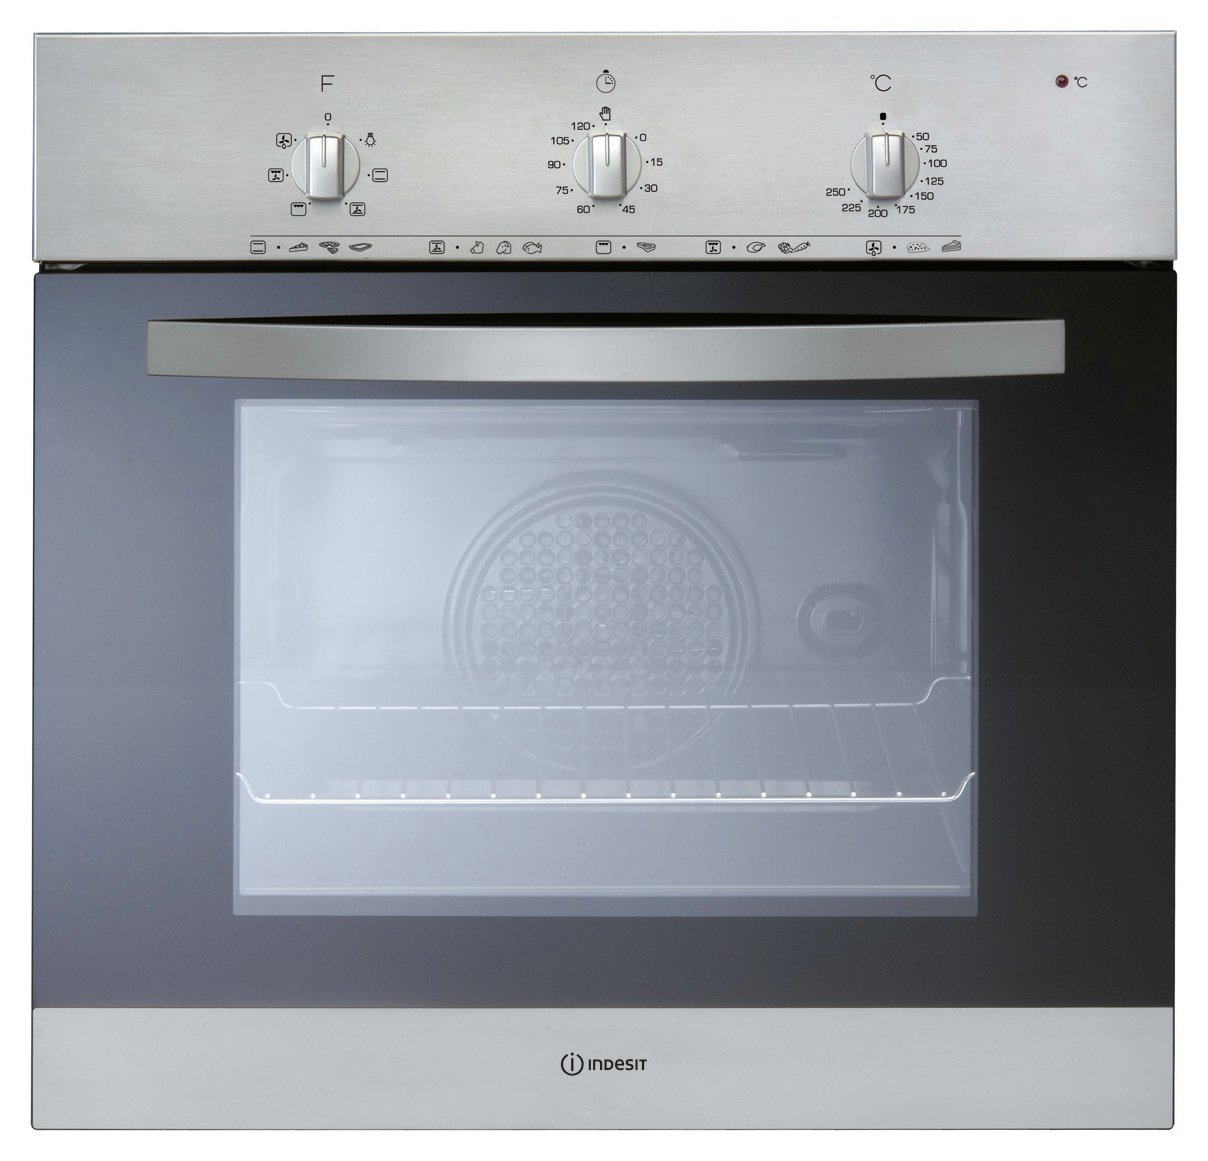 Indesit IFV5Y0IX Single Built In Oven - Silver